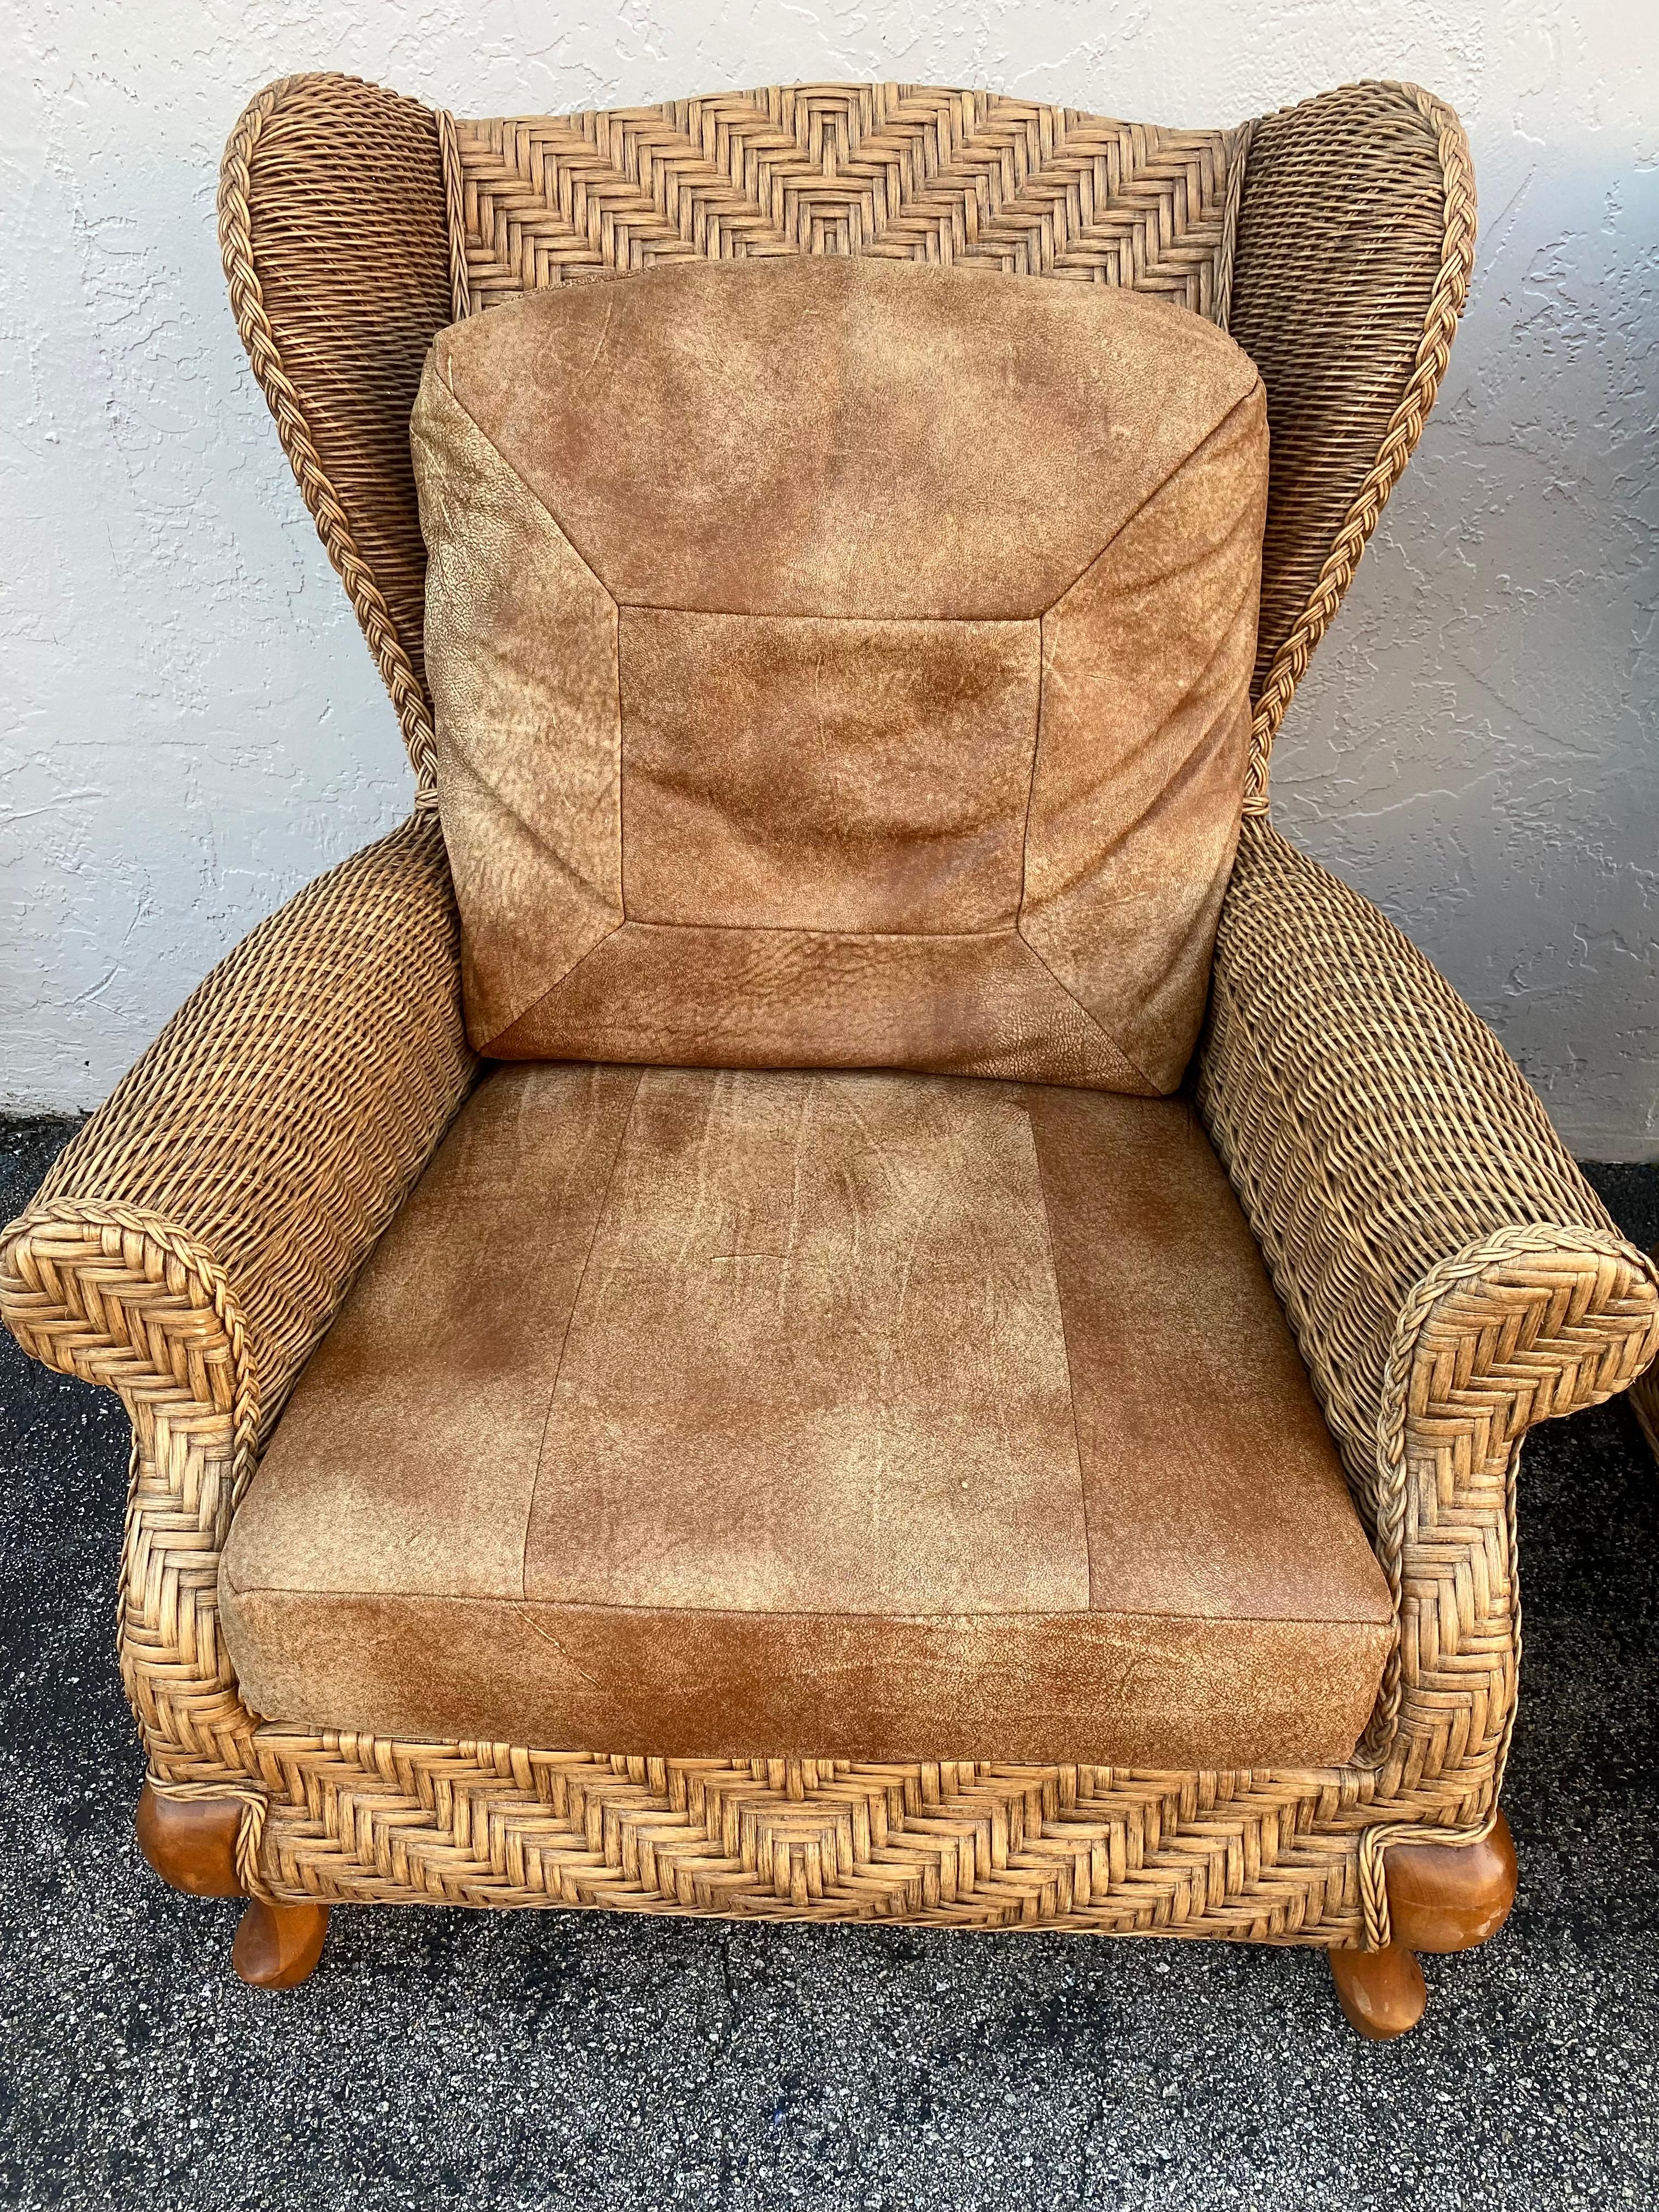 Upholstery 1980s Rattan Queen Anne Style XL Wingback Chairs, Set of 2 For Sale